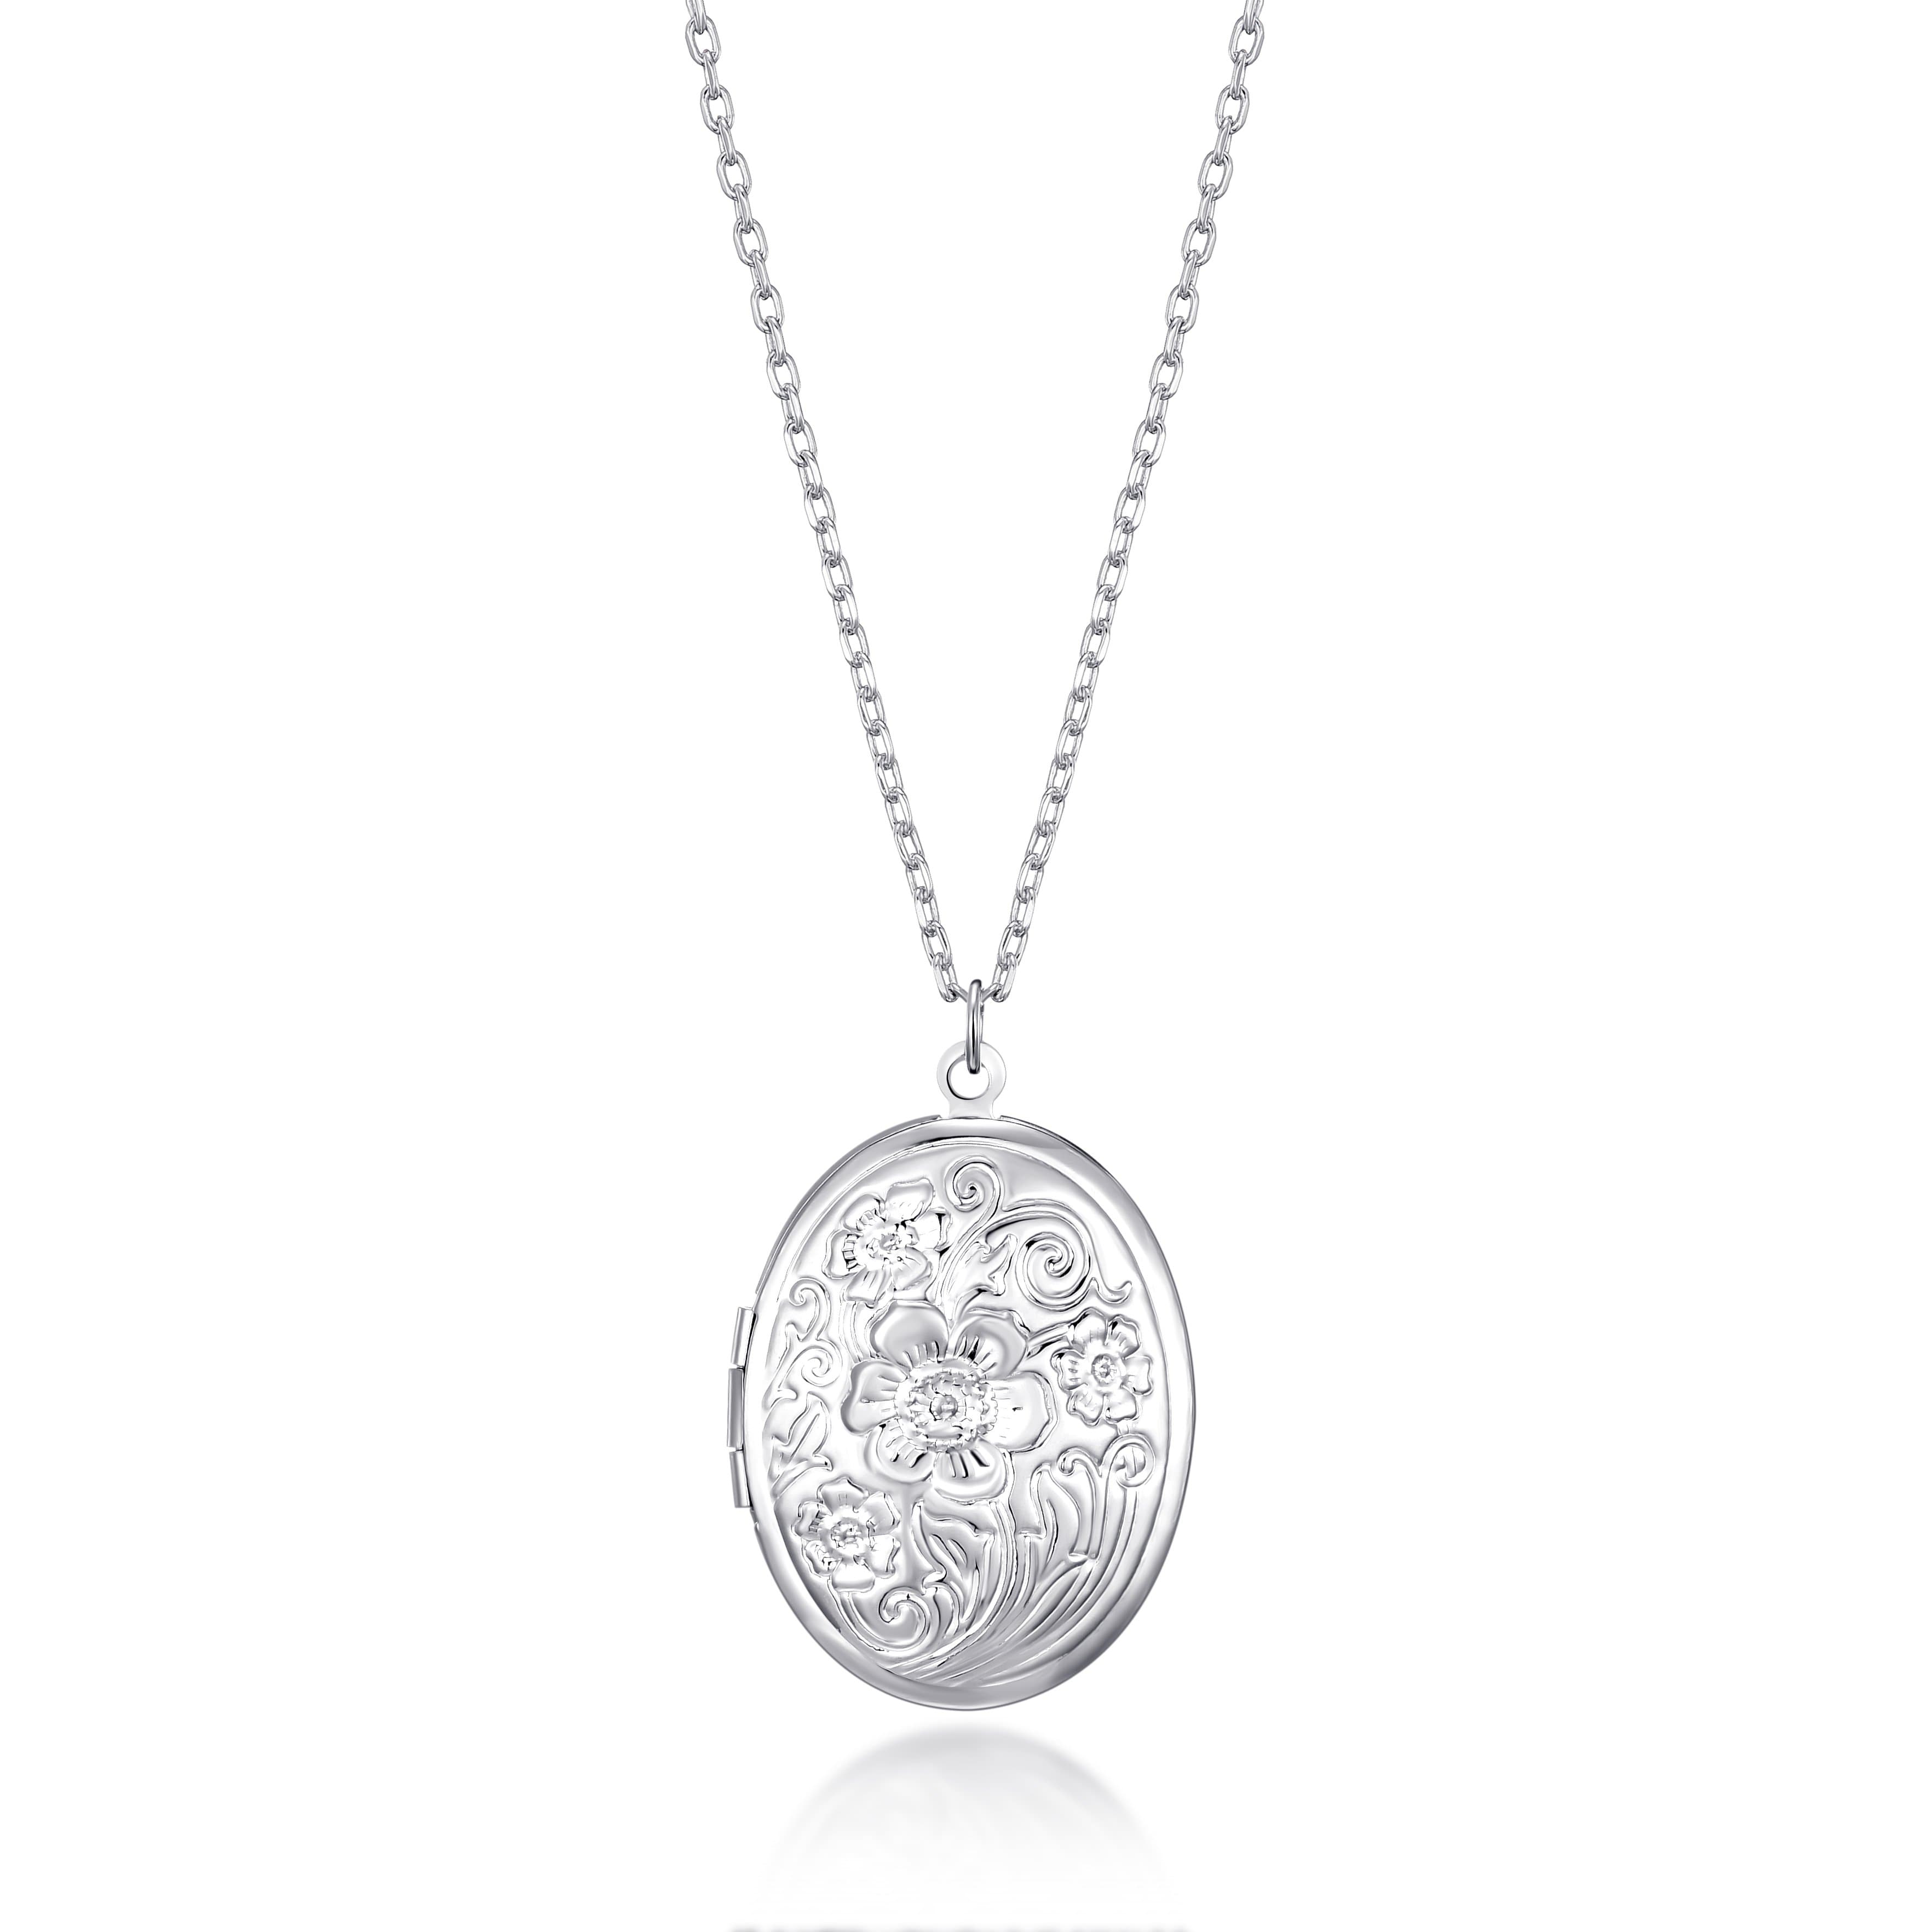 Silver Plated Oval Locket